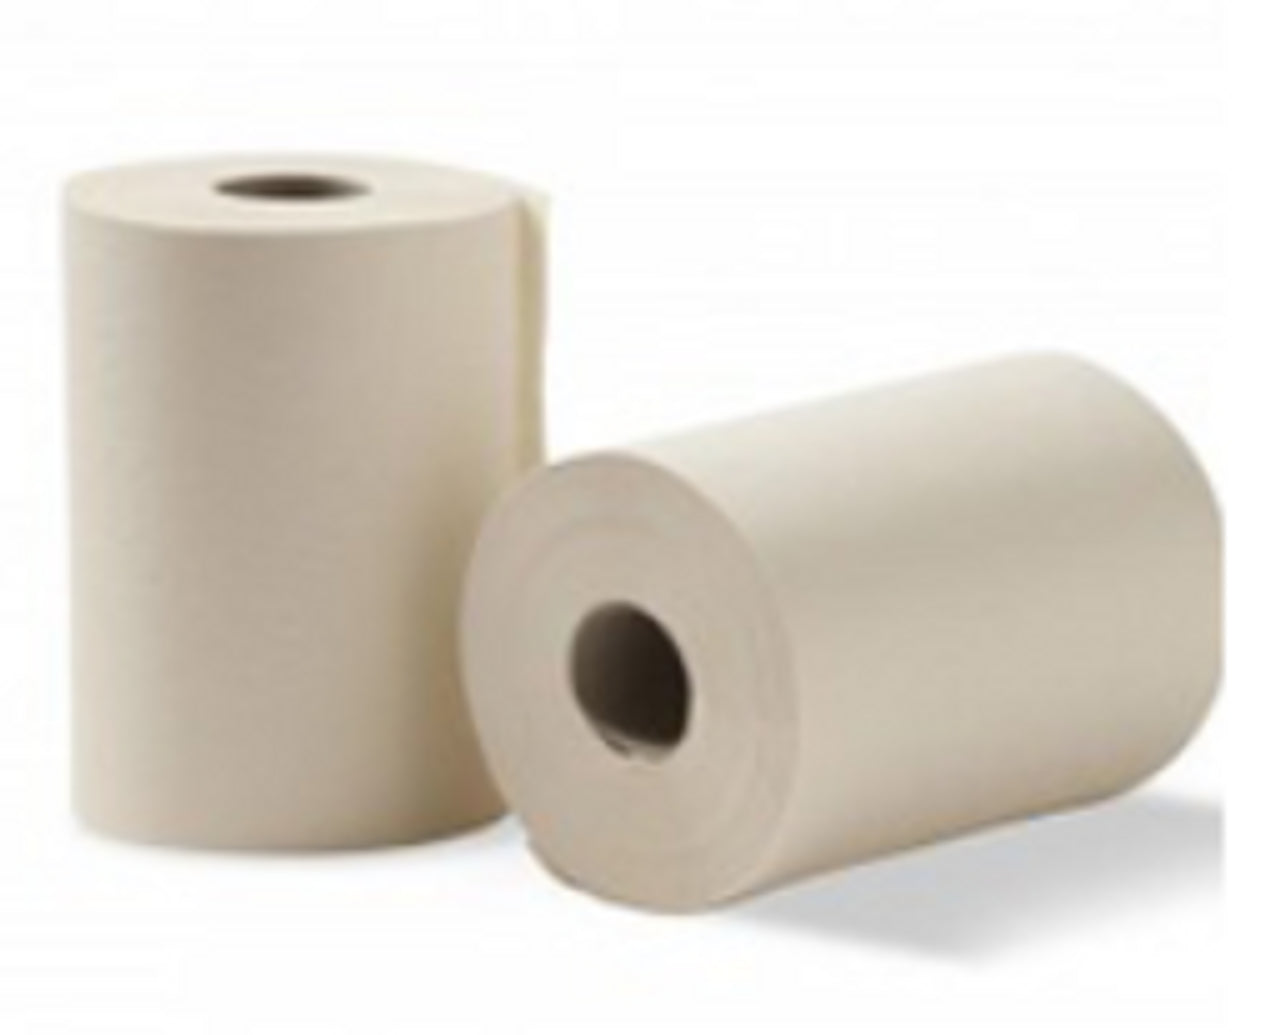 Calibre Premium Recyclable Hand Towel 1 Ply (16 Rolls)